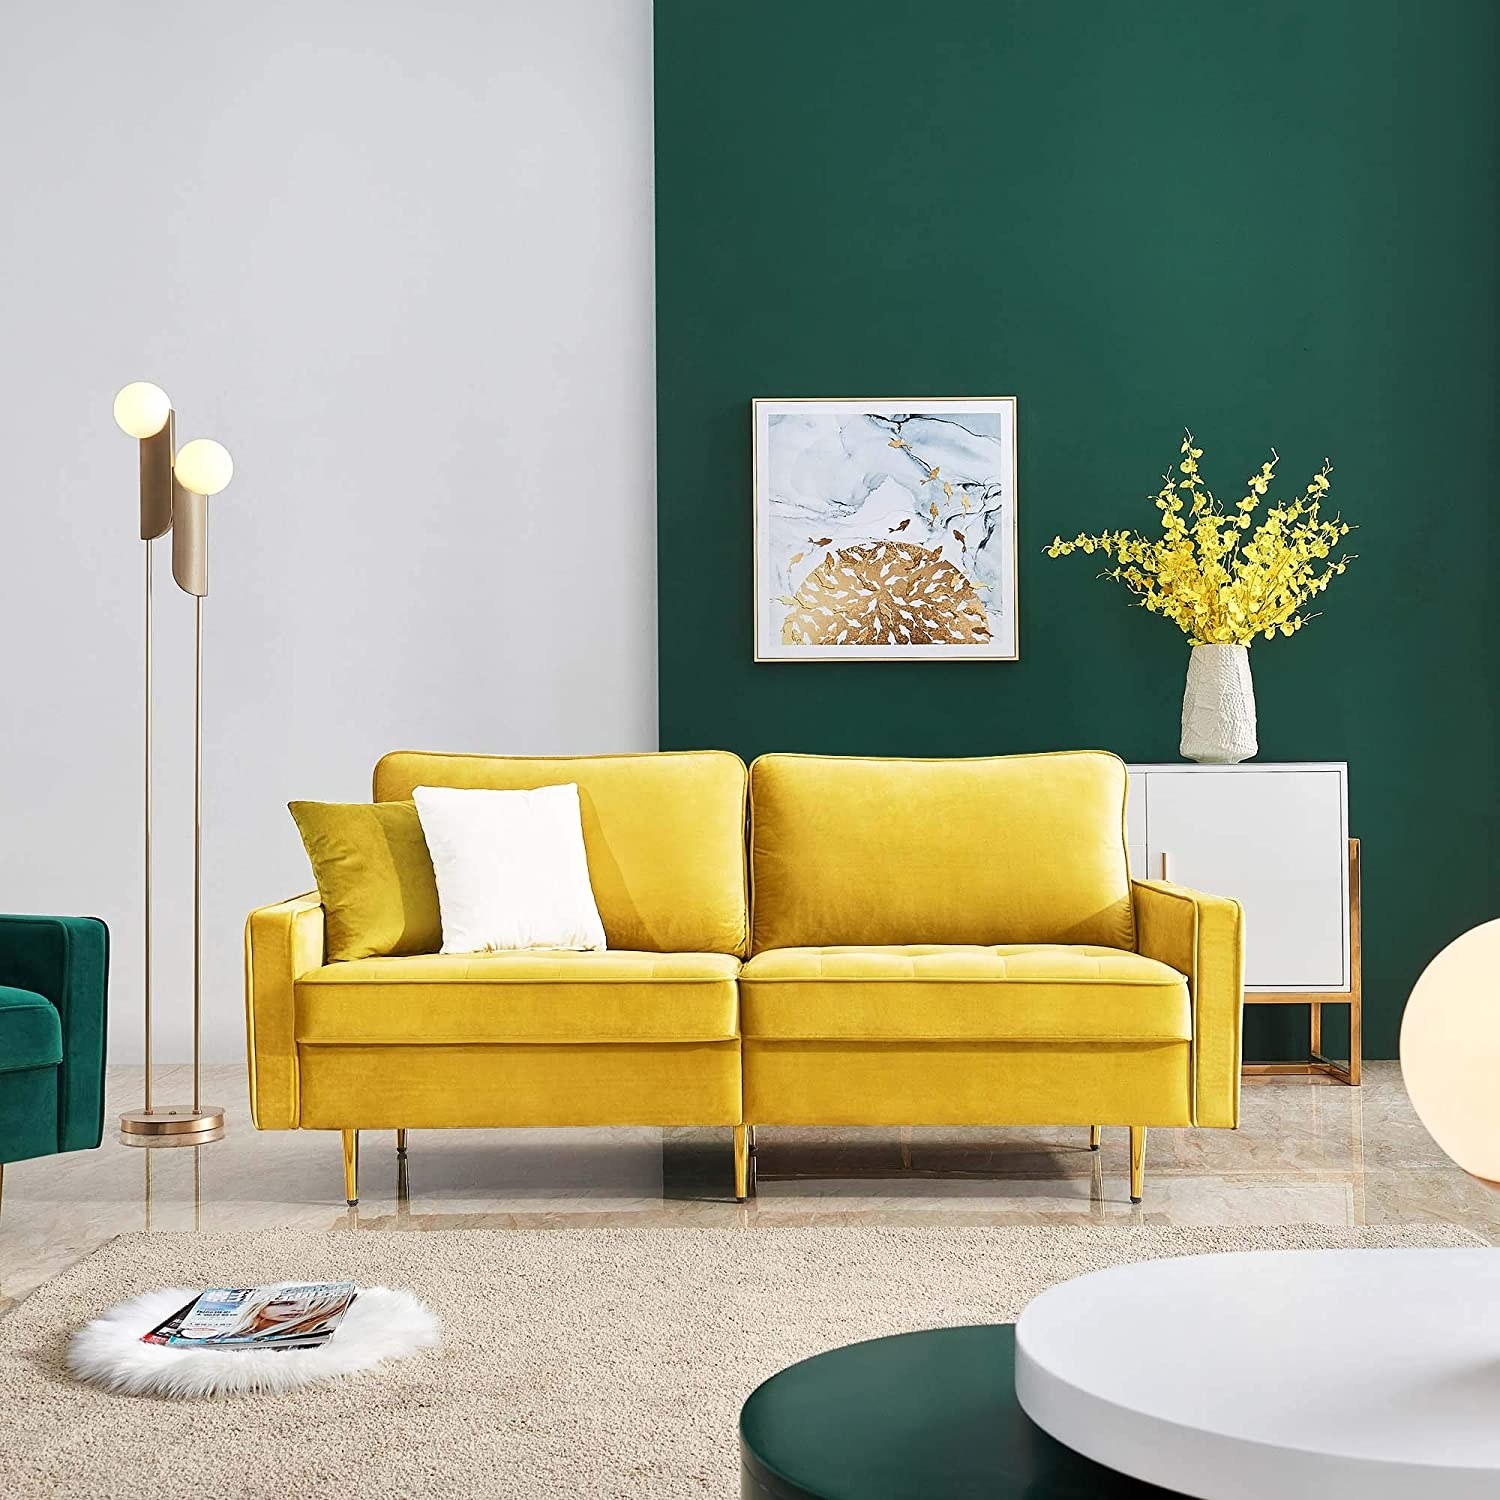 A yellow couch in a green room with white cushion